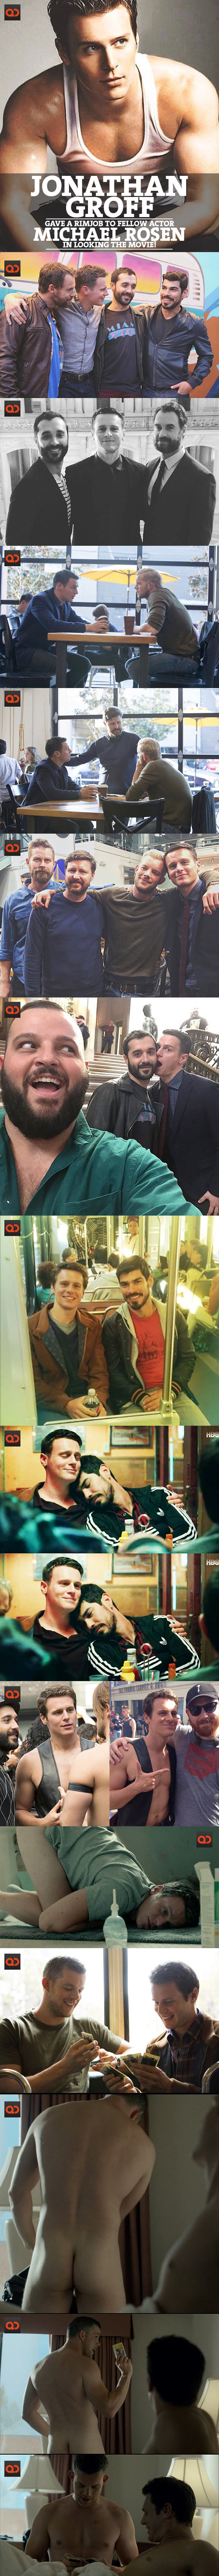 Jonathan Groff Gave A Rimjob To Fellow Actor Michael Rosen In Looking The Movie!